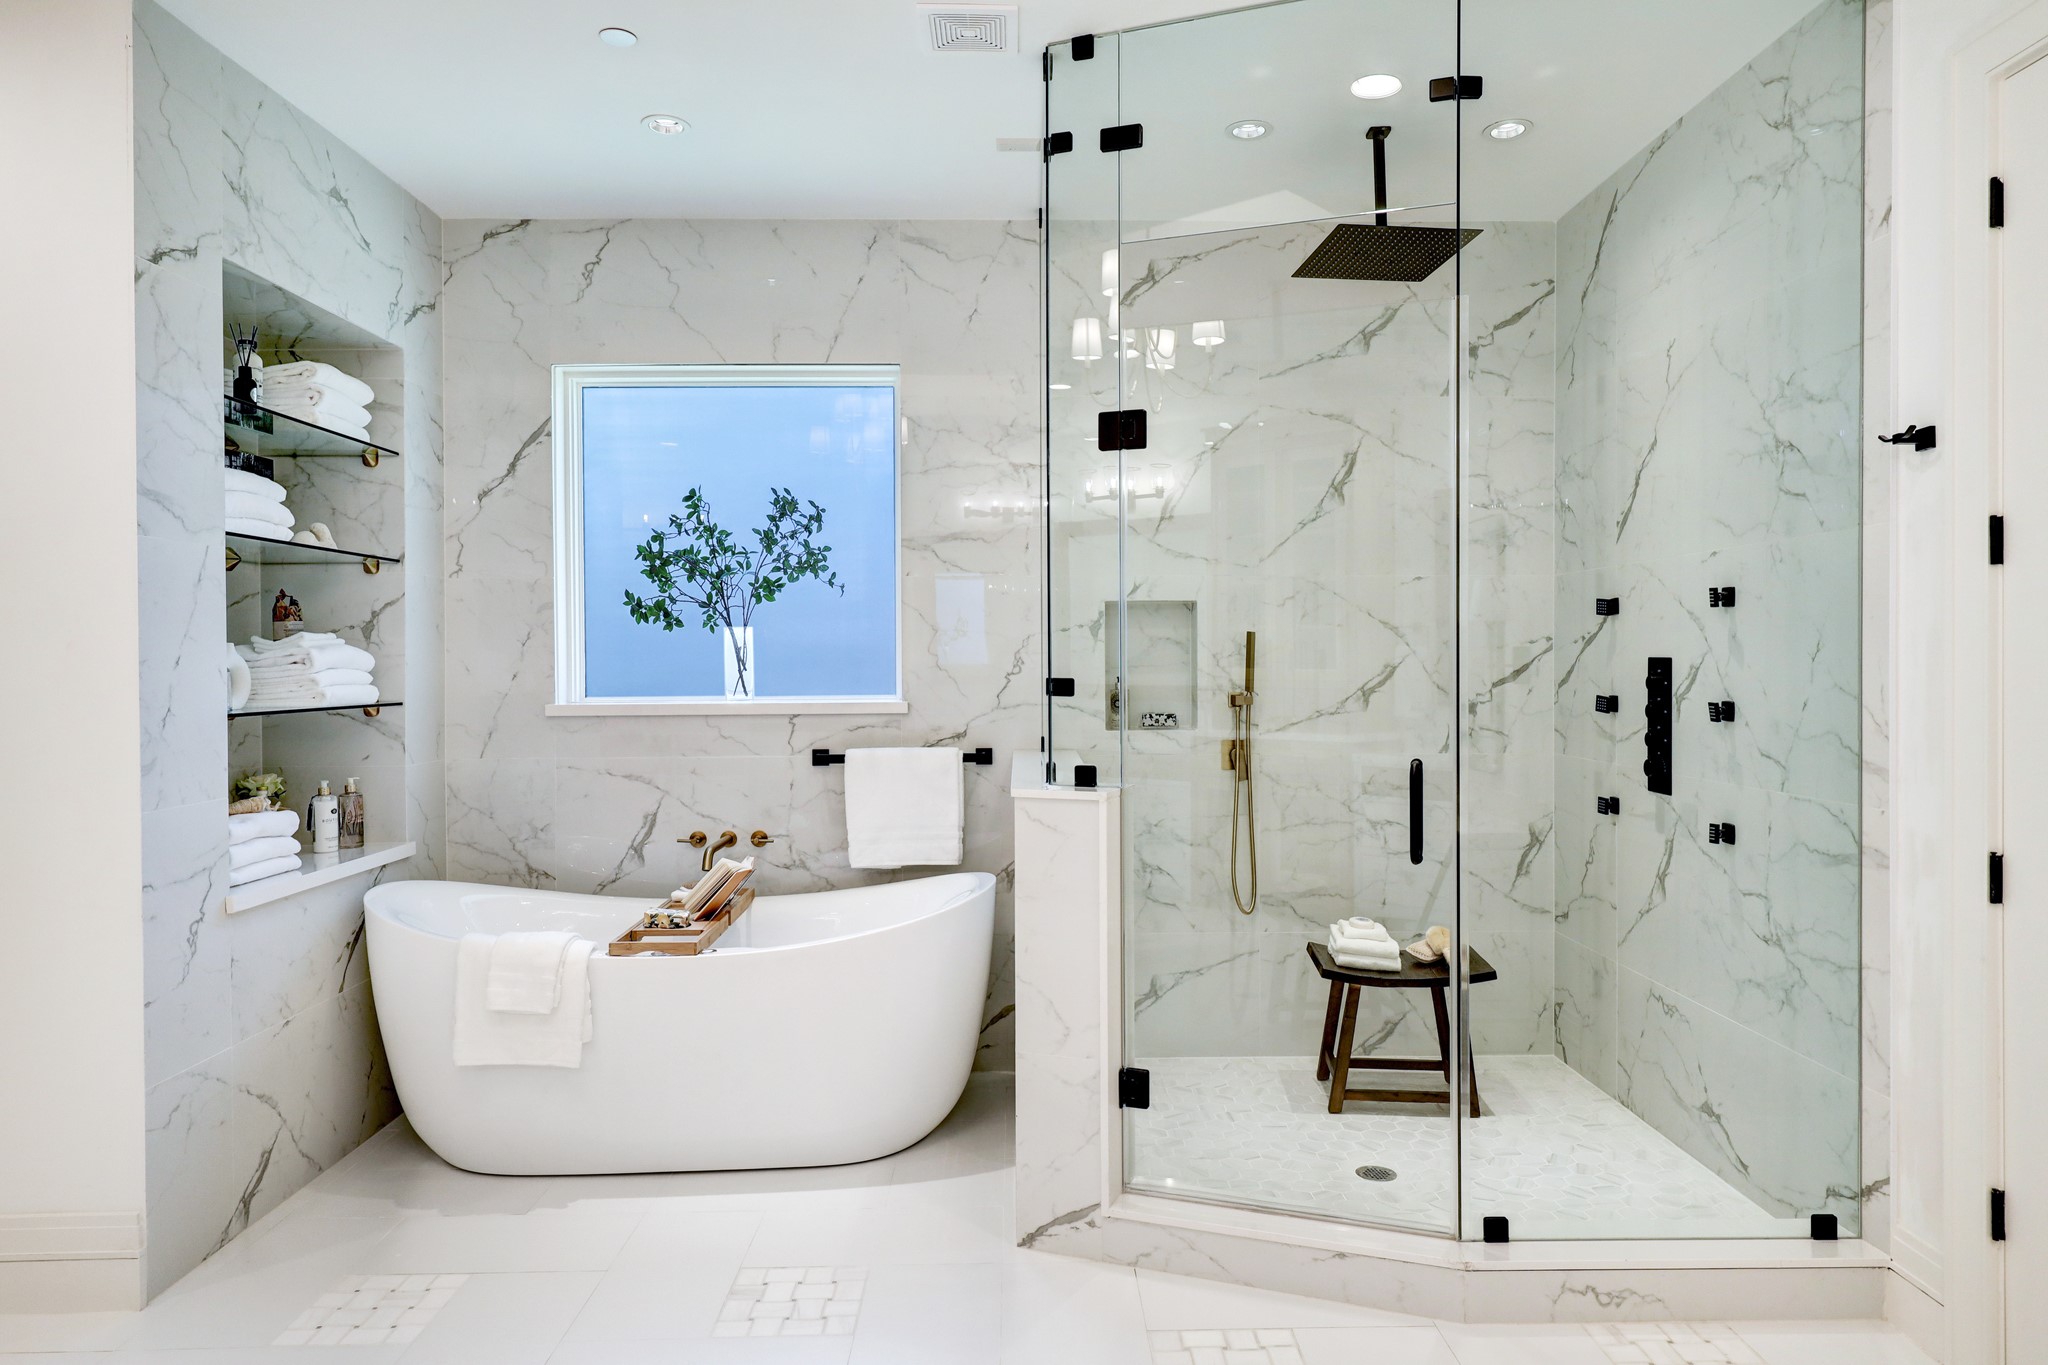 The primary bath features a bespoke walk-in shower with overhead rain shower, hand held sprayer and body jets. Deep standalone jetted, soaking tub...